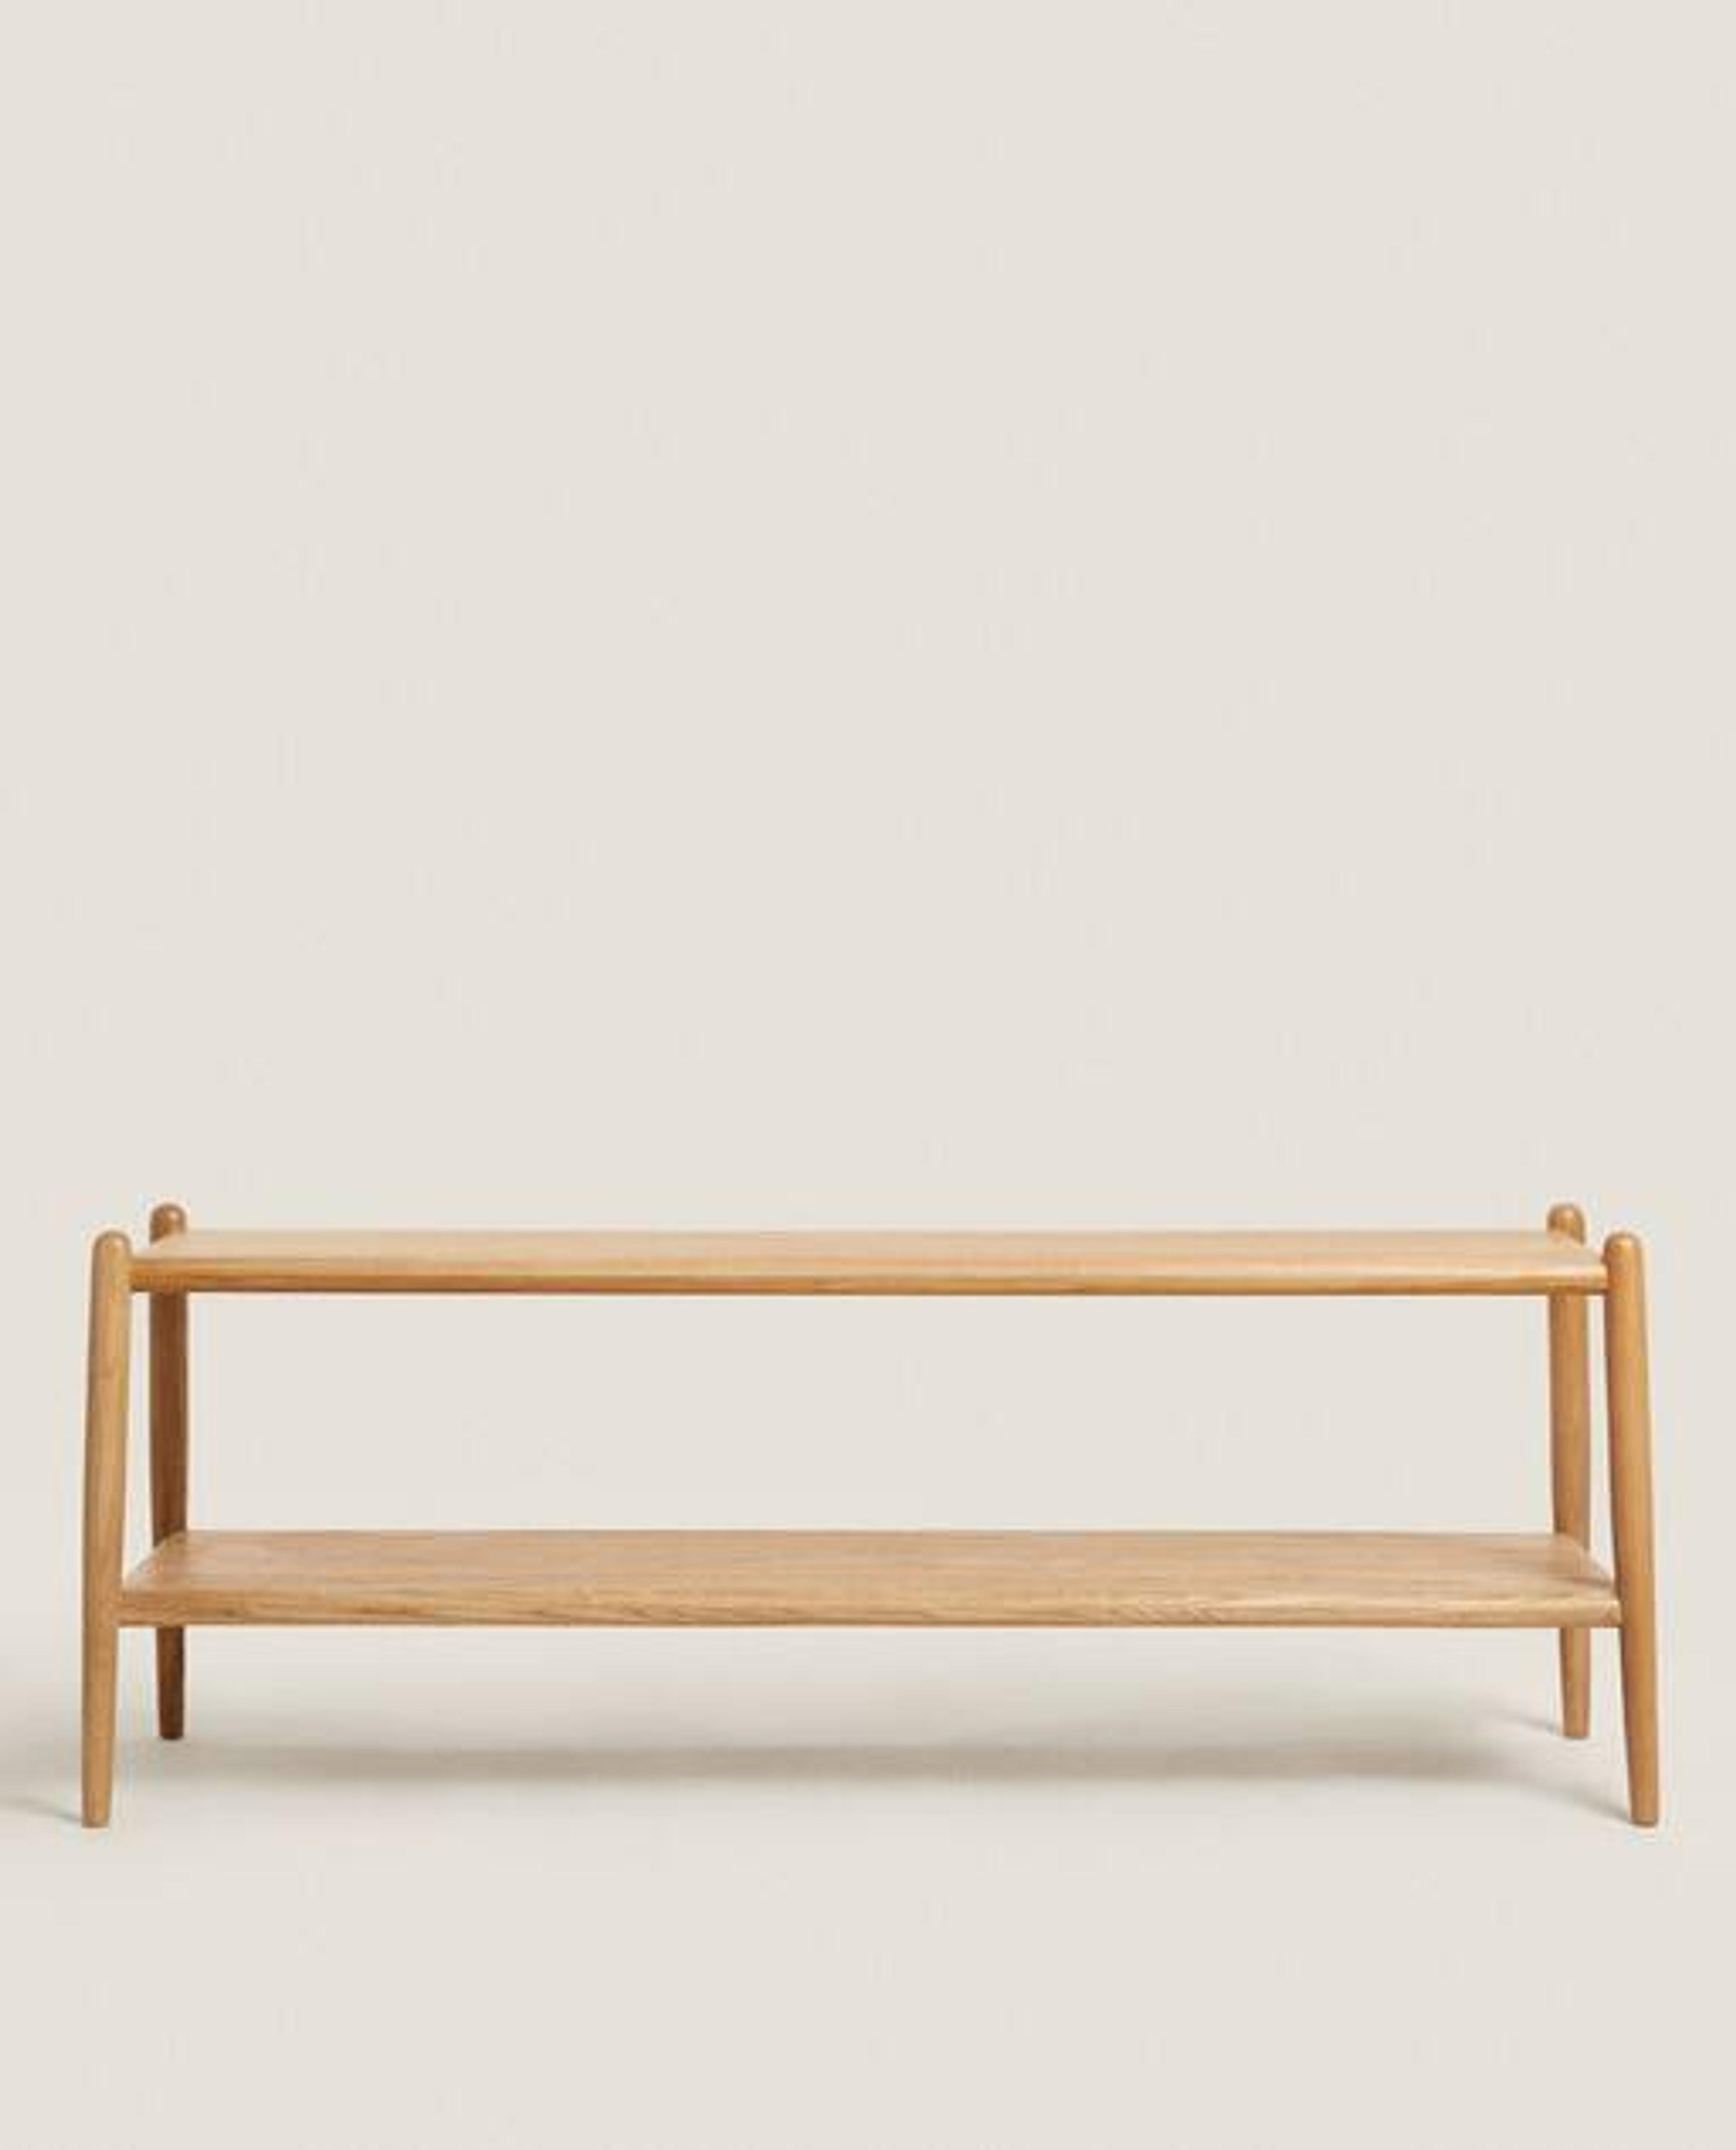 DOUBLE ASH BENCH